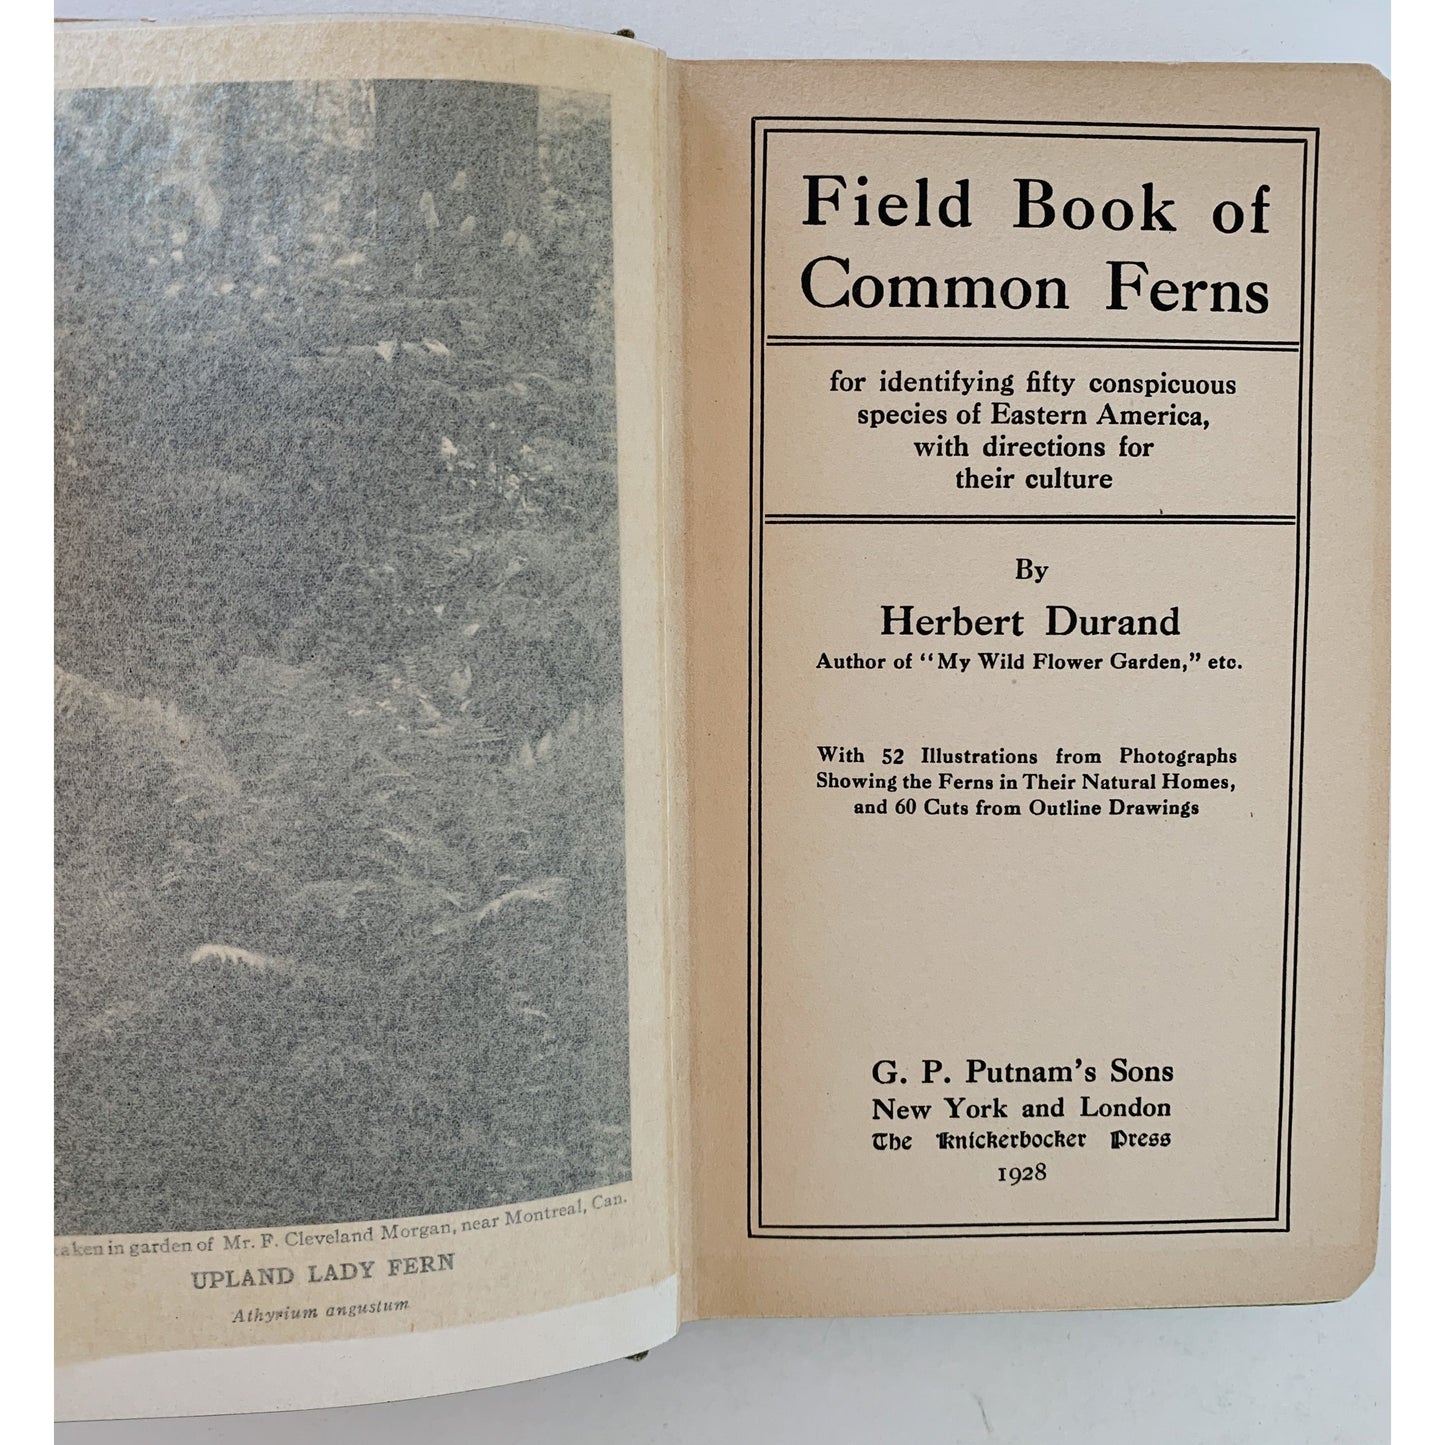 Field Book of Common Ferns, Eastern America, 1928